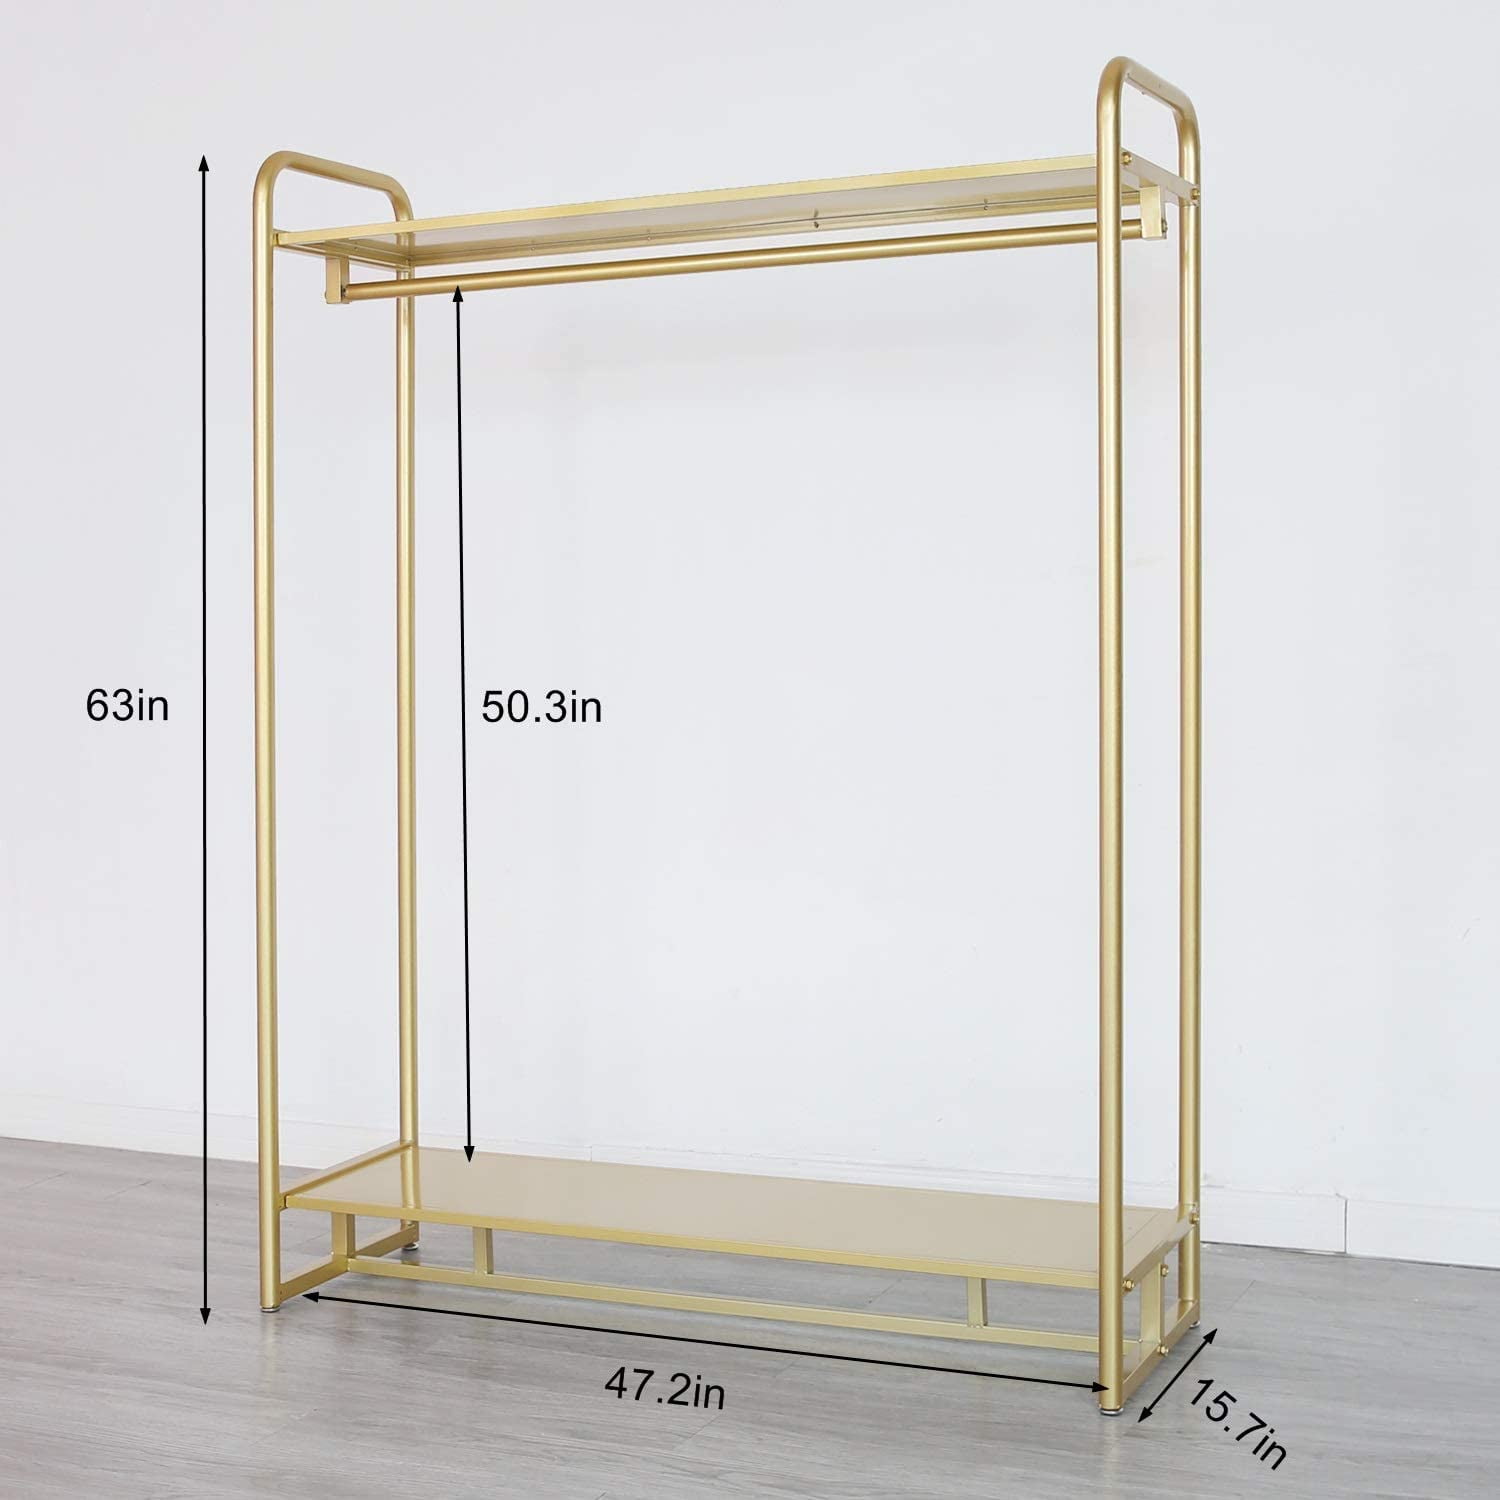  Gold Underwear Display Rack for Boutique/Retail Store - Modern  Heavy Duty Large Bra Storage Rack, Freestanding Sturdy Metal Rails (Color :  Gold, Size : 150cm(59) Length) : Home & Kitchen